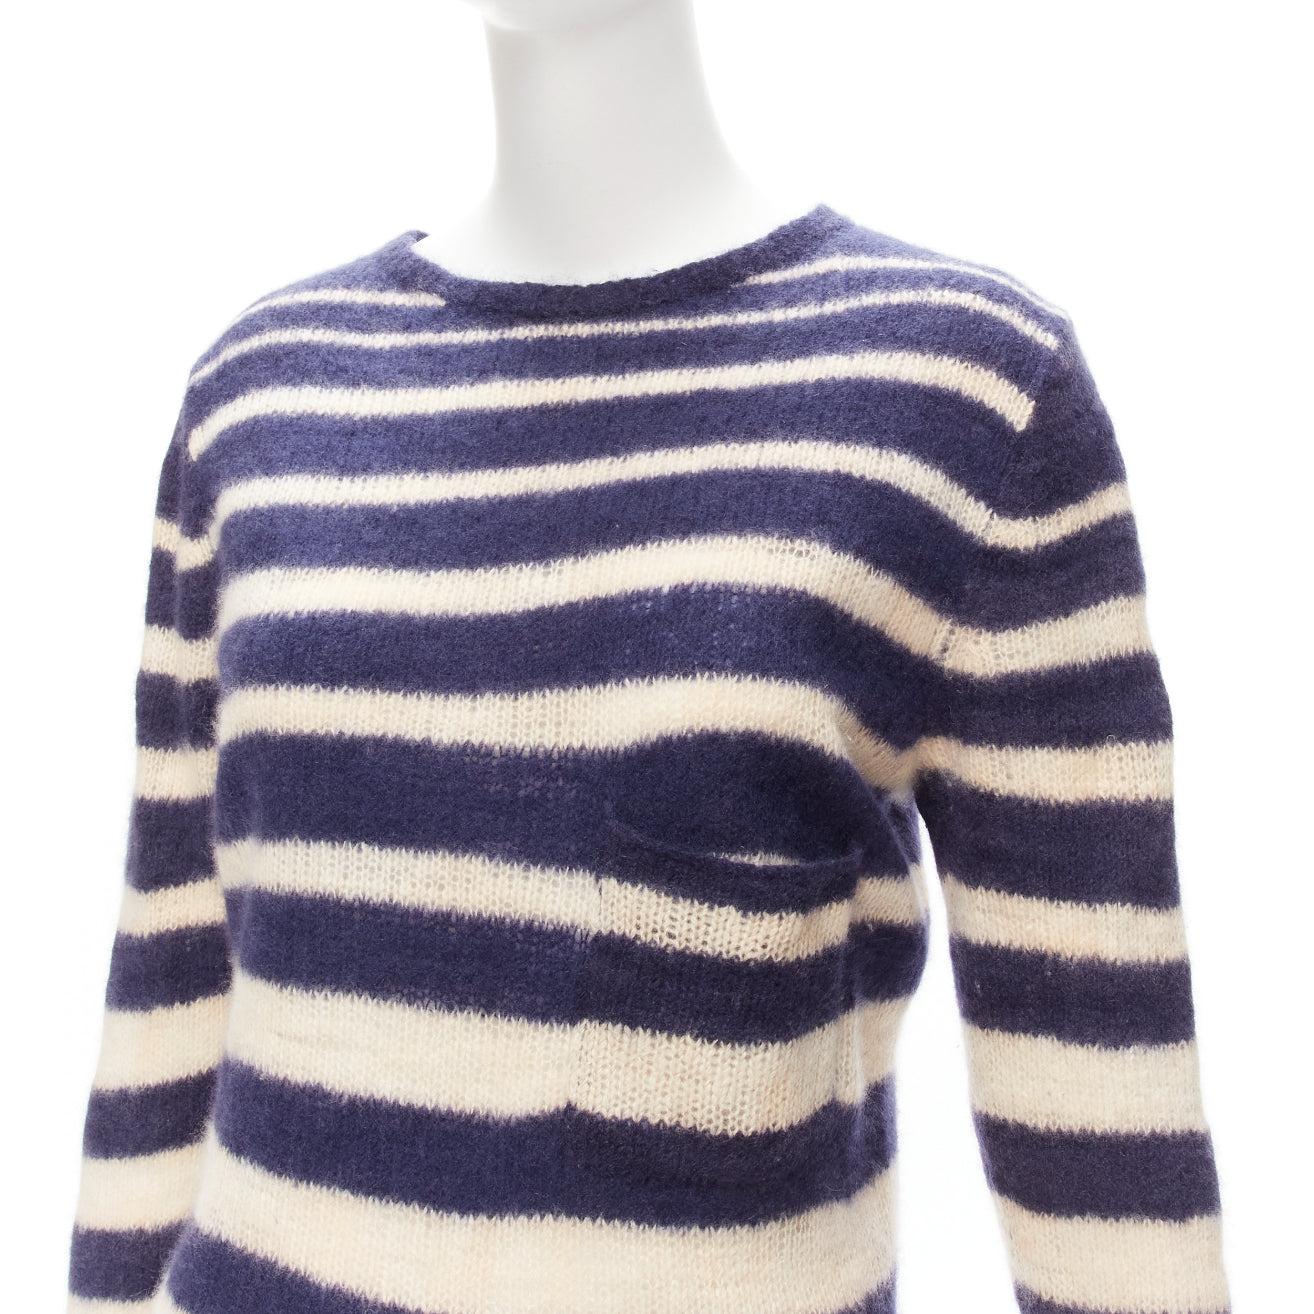 THE ELDER STATESMAN 100% cashmere navy cream nautical stripes sweater S
Reference: CNLE/A00240
Brand: The Elder Statesmen
Material: Cashmere
Color: Cream, Navy
Pattern: Striped
Closure: Pullover
Extra Details: 100% cashmere. Gradient stripe. Single